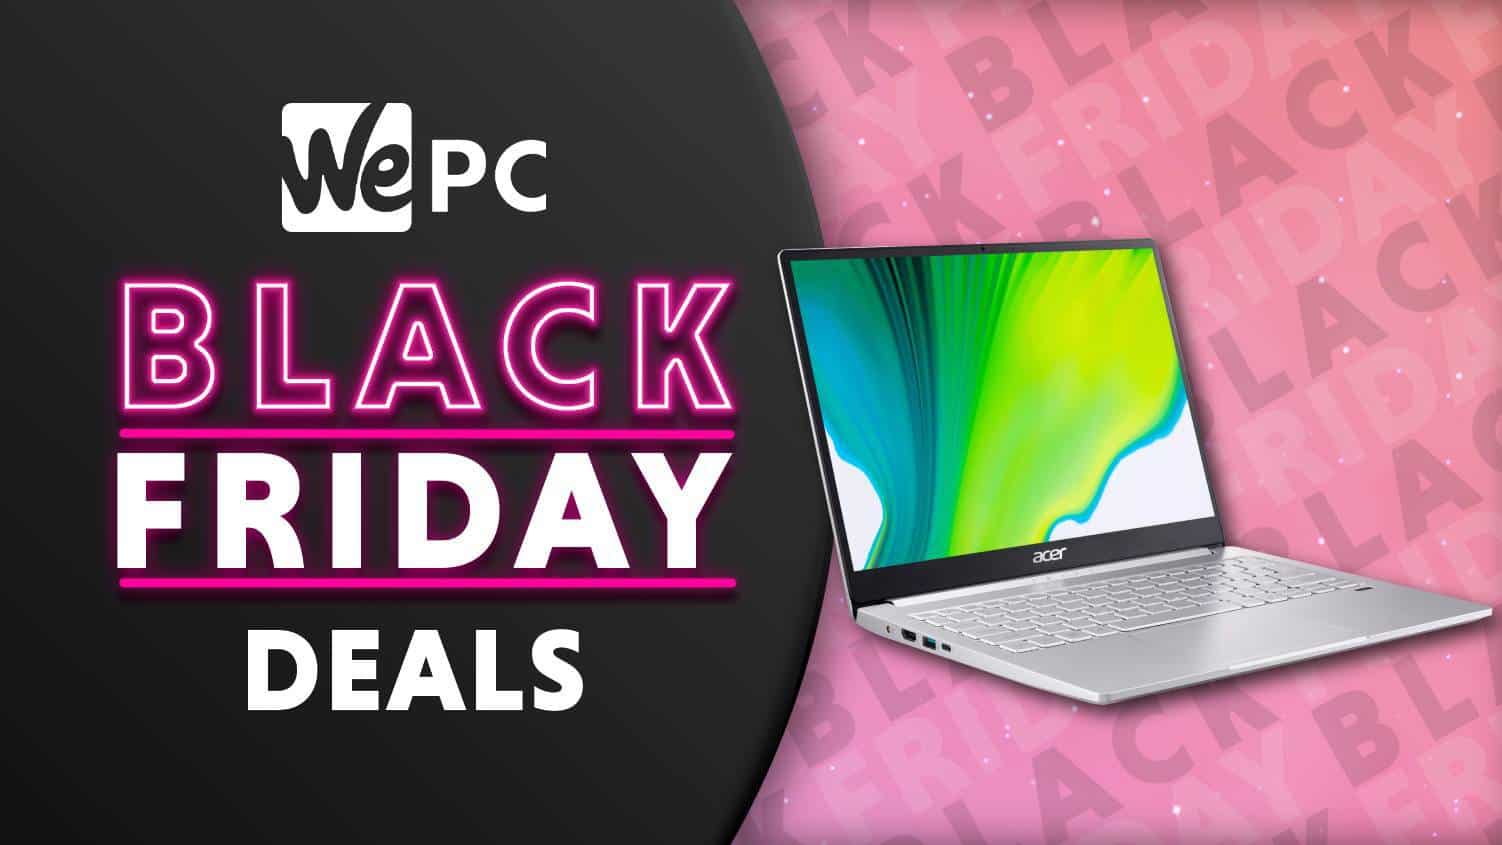 Up to £150 off these Acer Laptop early Black Friday 2021 deals